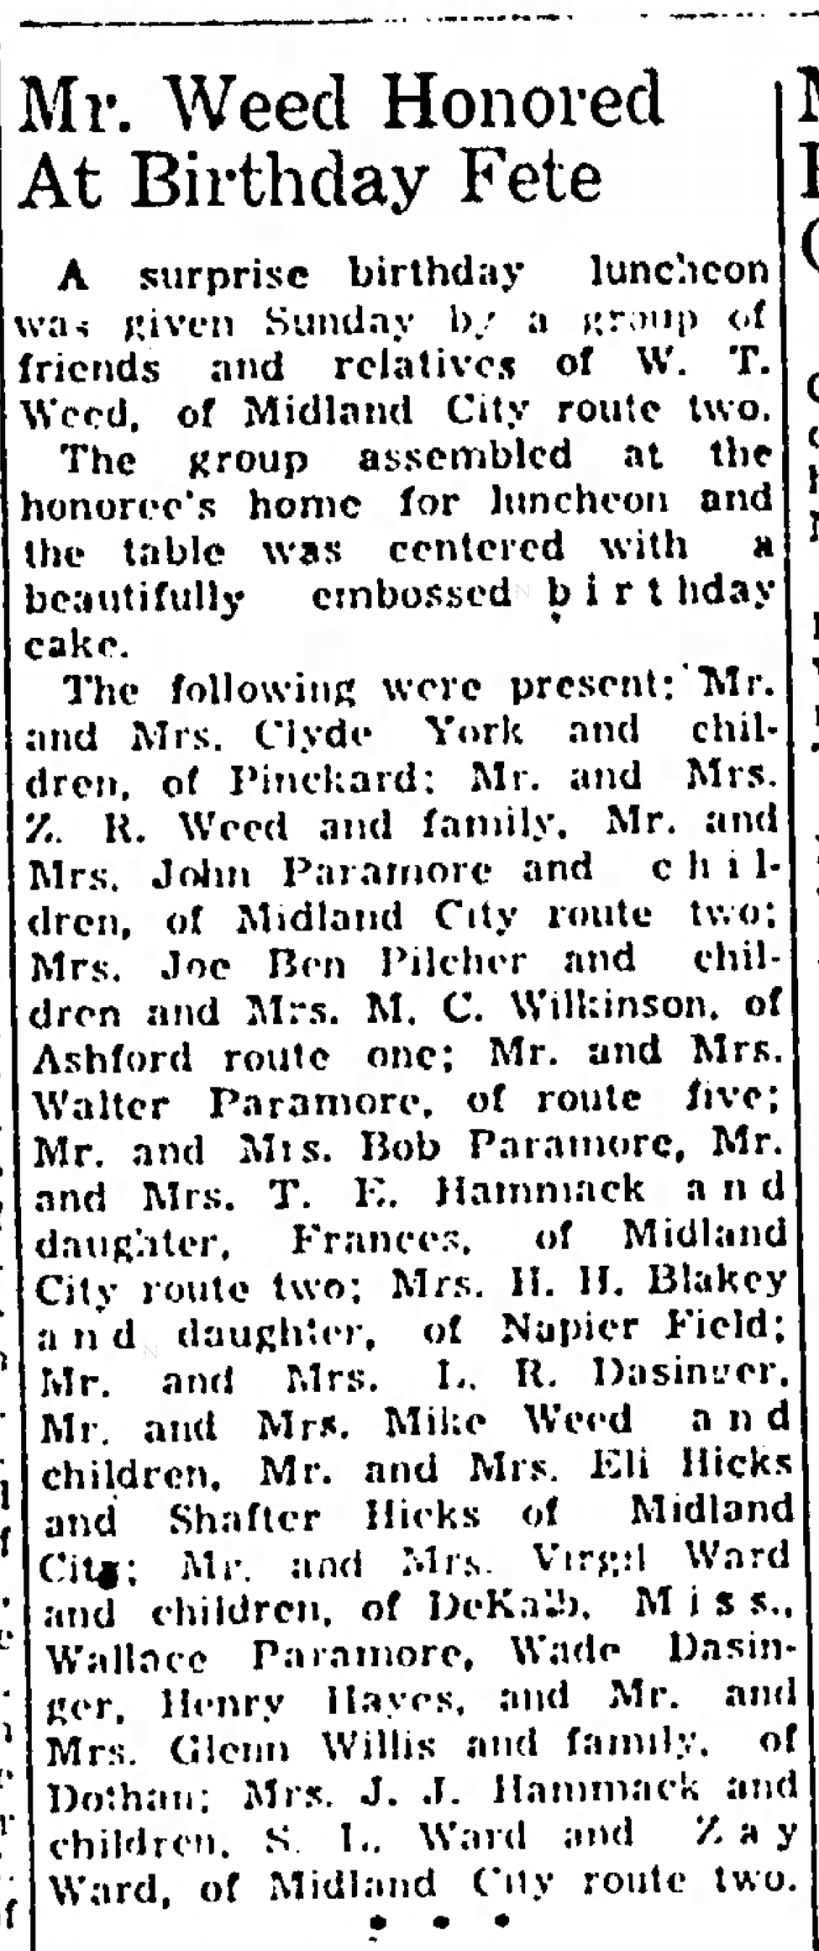 Dothan Eagle 3 Mar 1948 p 5 - Mr Mrs Clyde York children at Mr Weed birthday fete